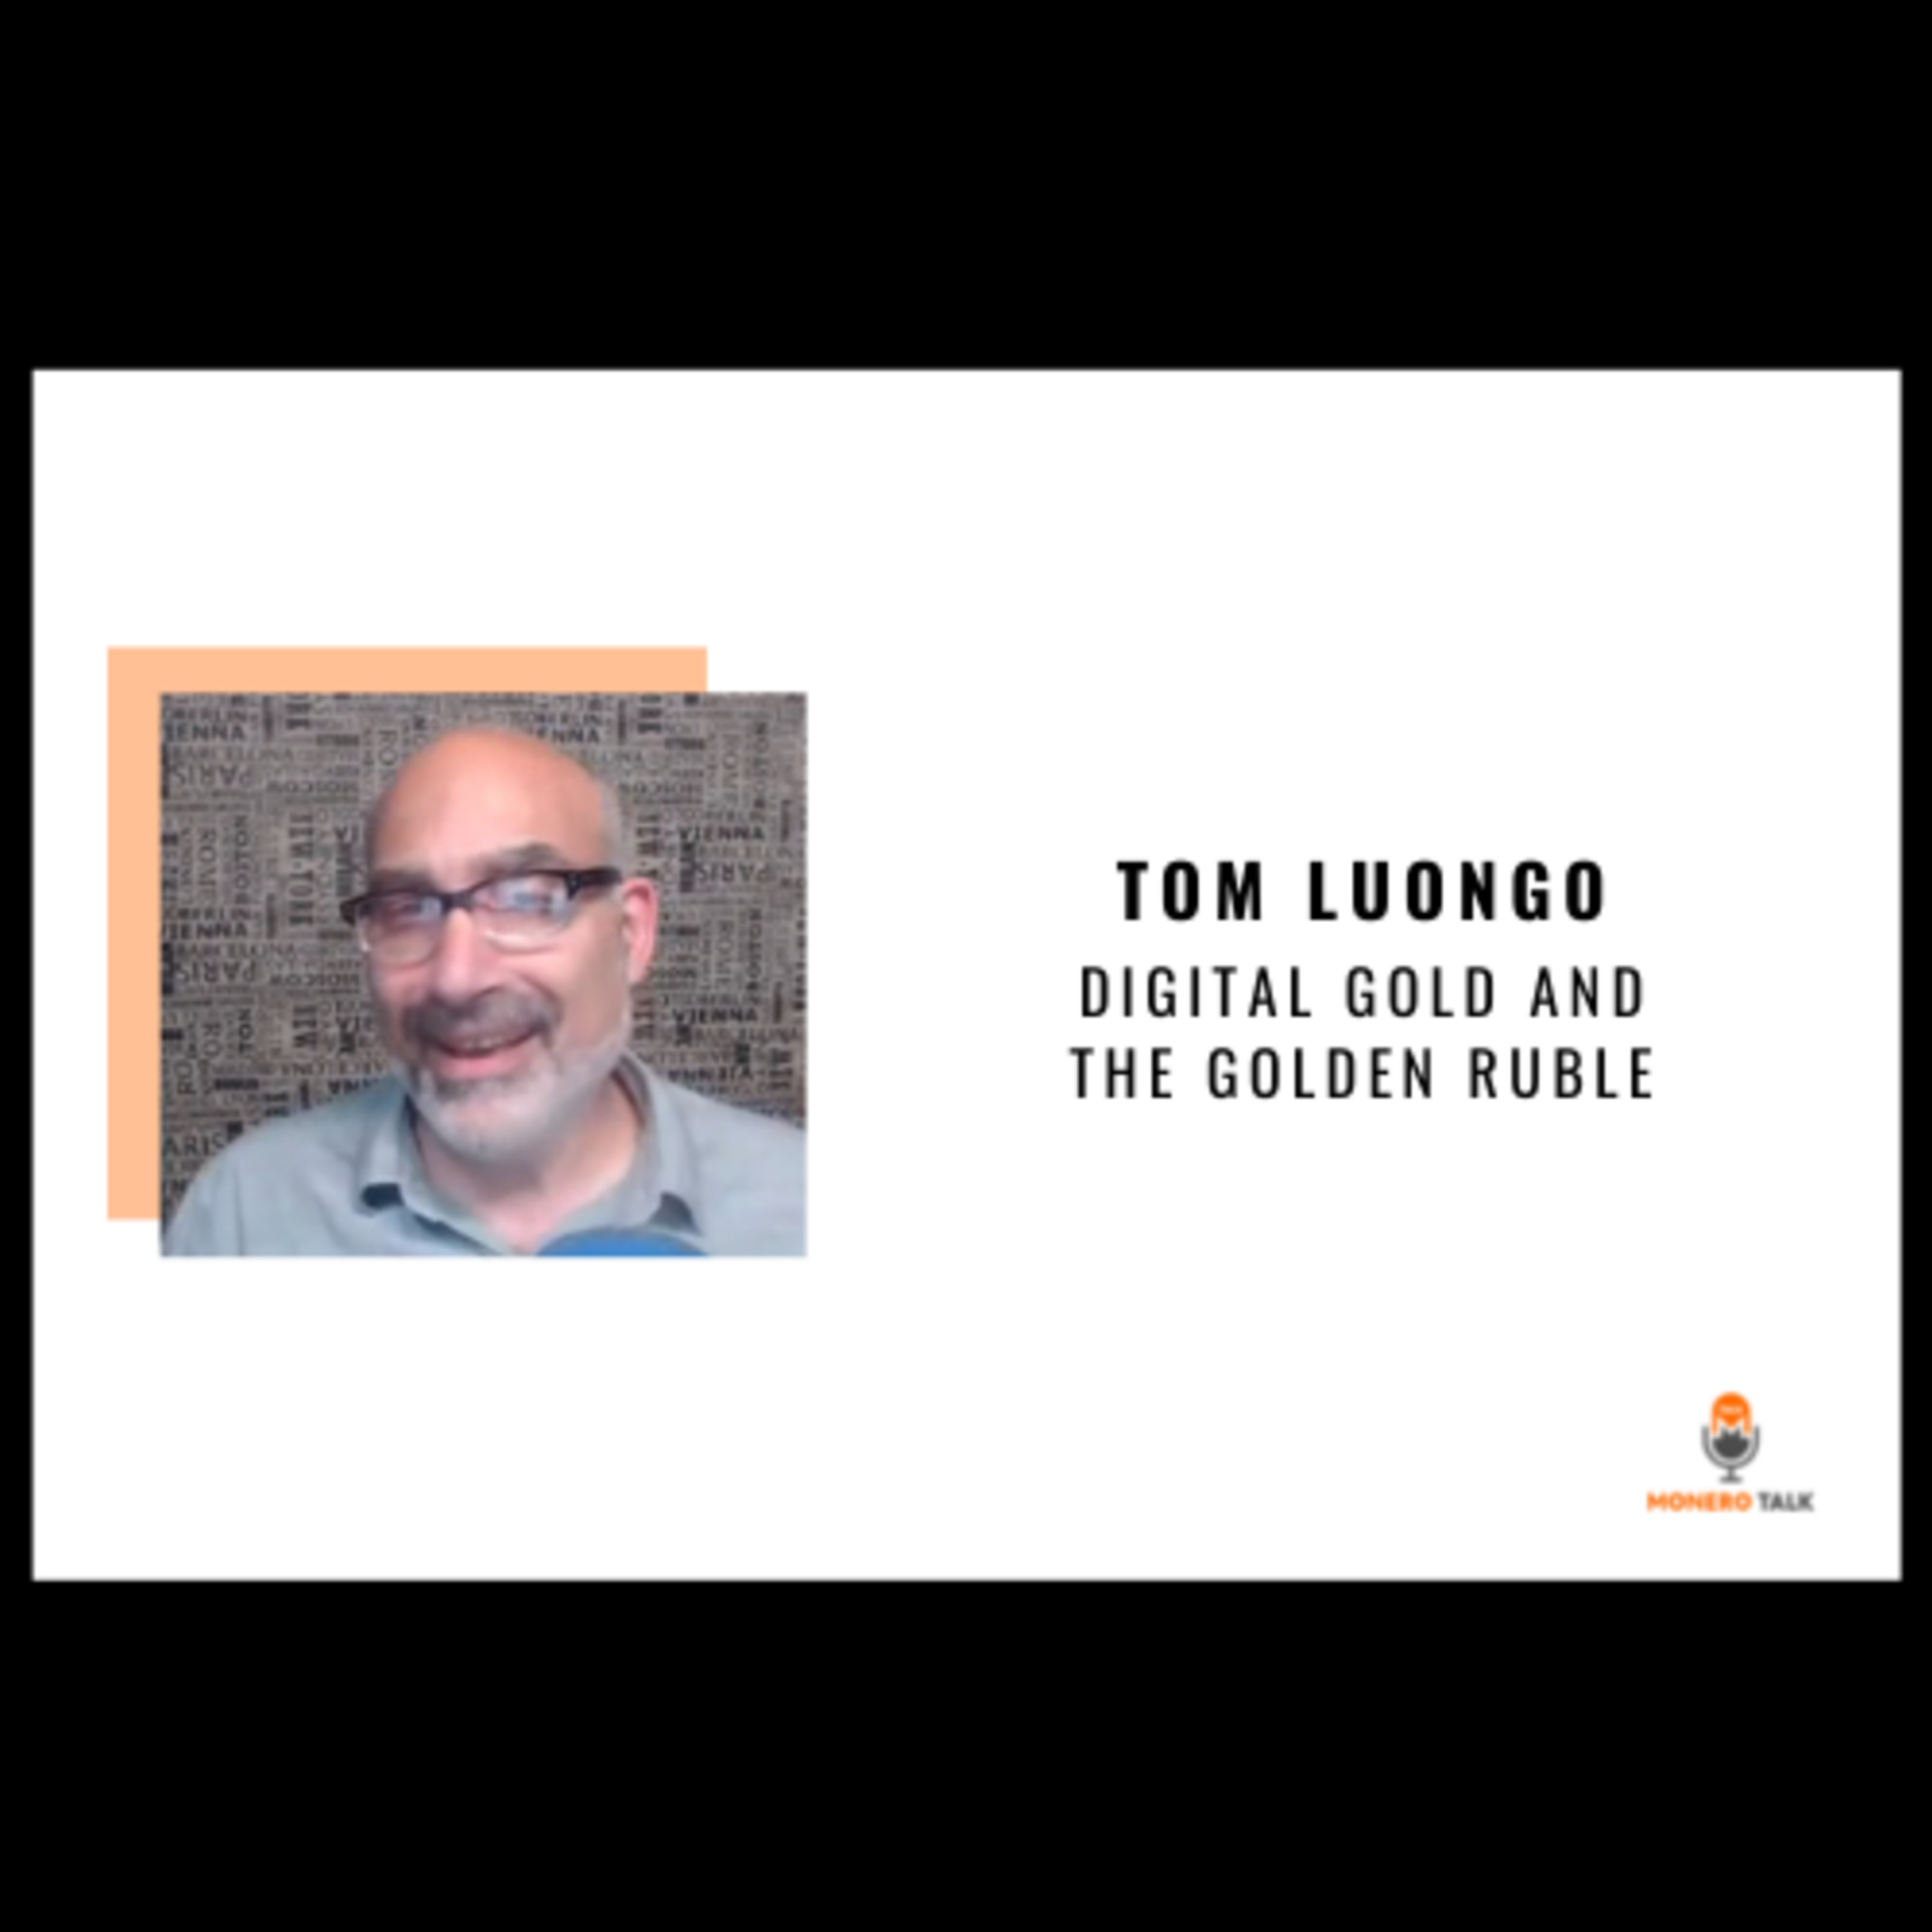 Tom Luongo on Digital Gold and the Golden Ruble